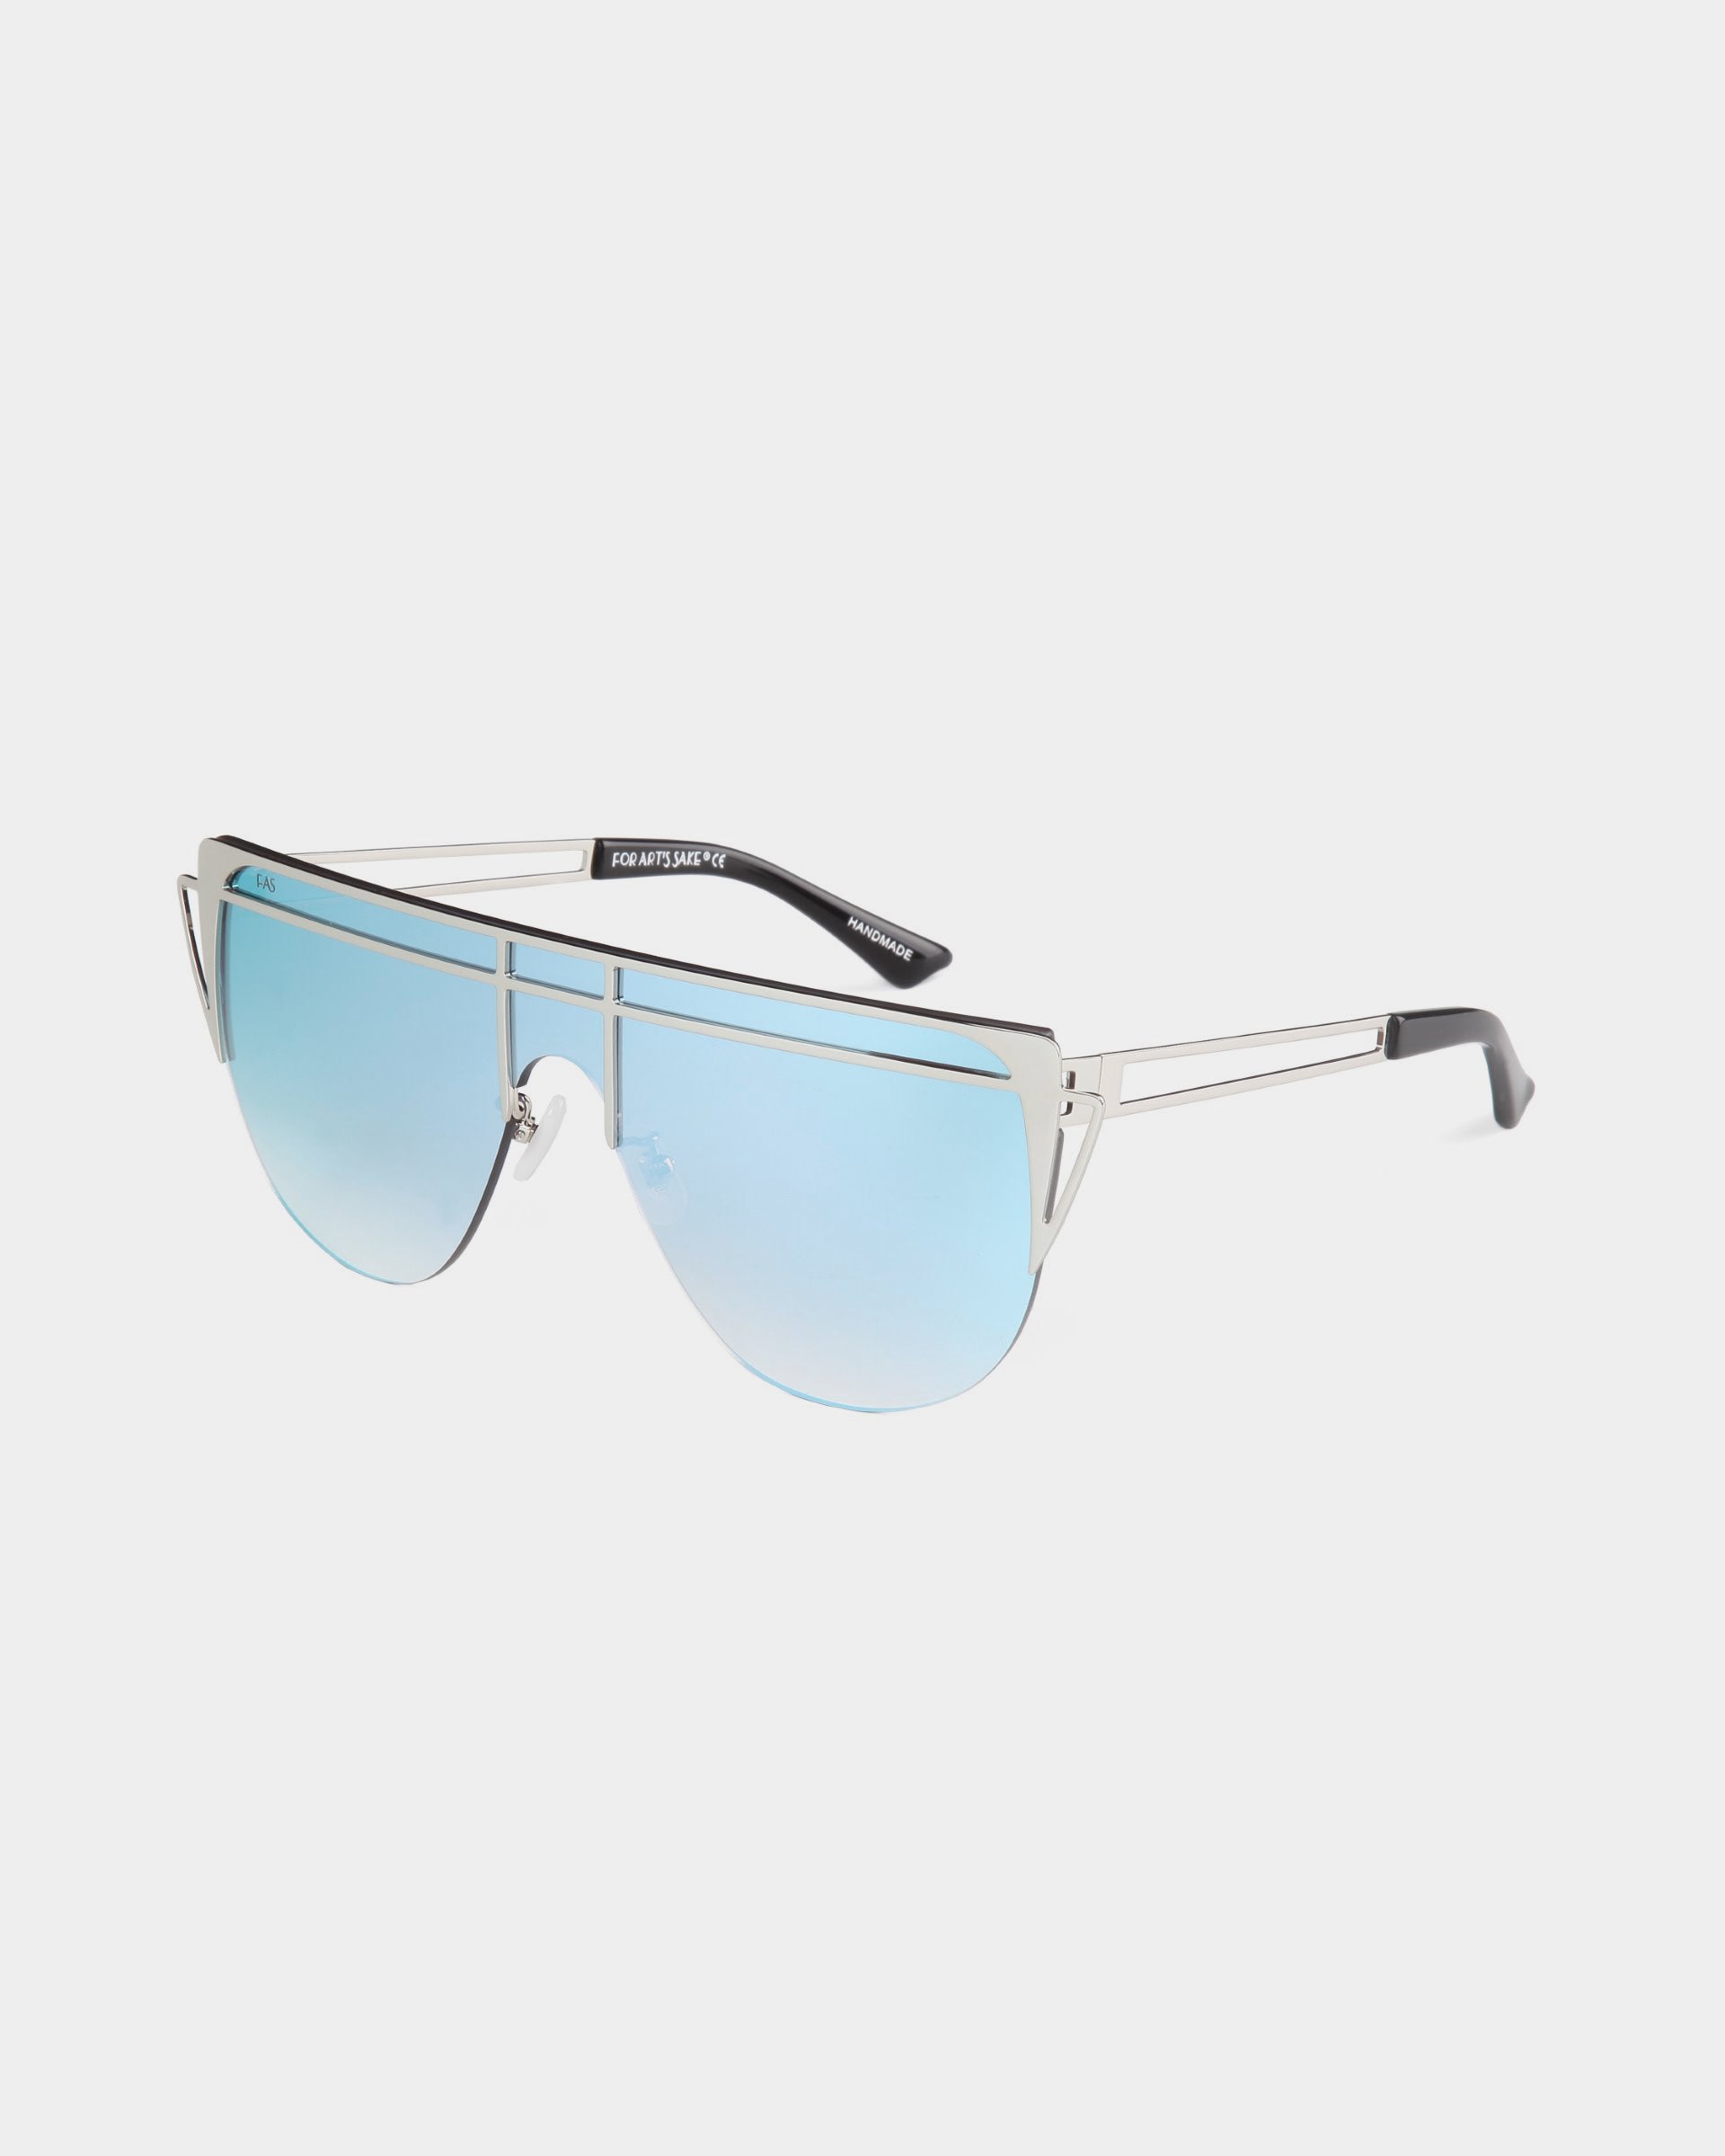 Sleek silver-framed sunglasses featuring blue-tinted, semi-transparent lenses. The design is modern with a double bridge and thin metal arms, offering a stylish and futuristic look. These avant-garde Alien sunglasses by For Art&#39;s Sake® provide 100% UV protection, blending contemporary flair with essential eye safety.